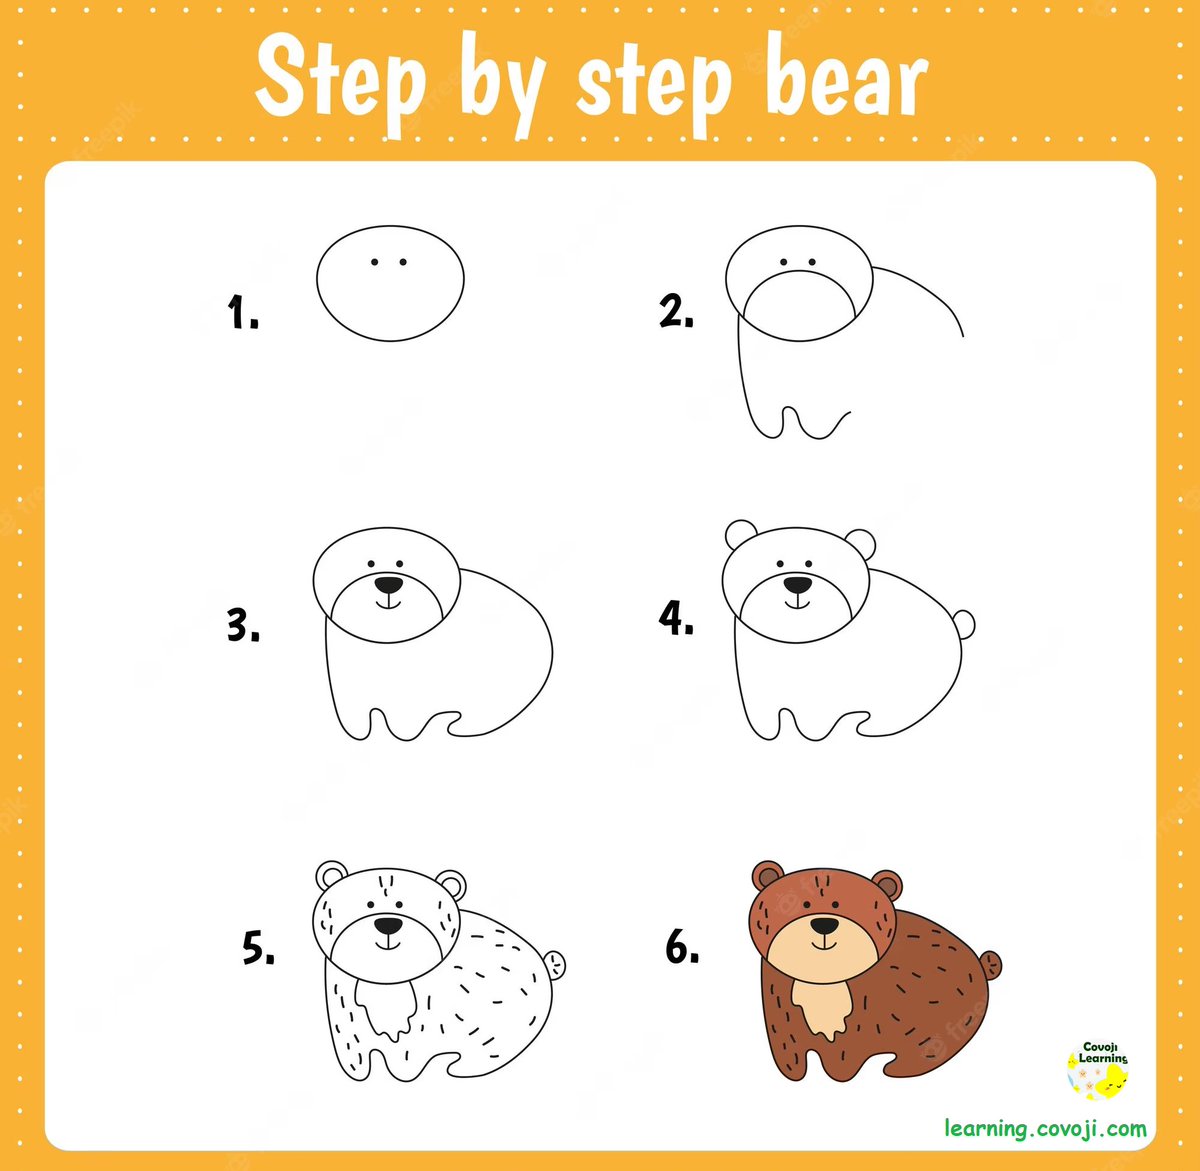 The biggest bears are the world’s largest animals that live on land and eat meat. learning.covoji.com
Let's draw a bear.

#kids #draw #drawing #bear #funtimes #activities #Parents #parentslife #Kindergarten #preschool #teaching #chiava #alastoria #events #familyfun #Sunday